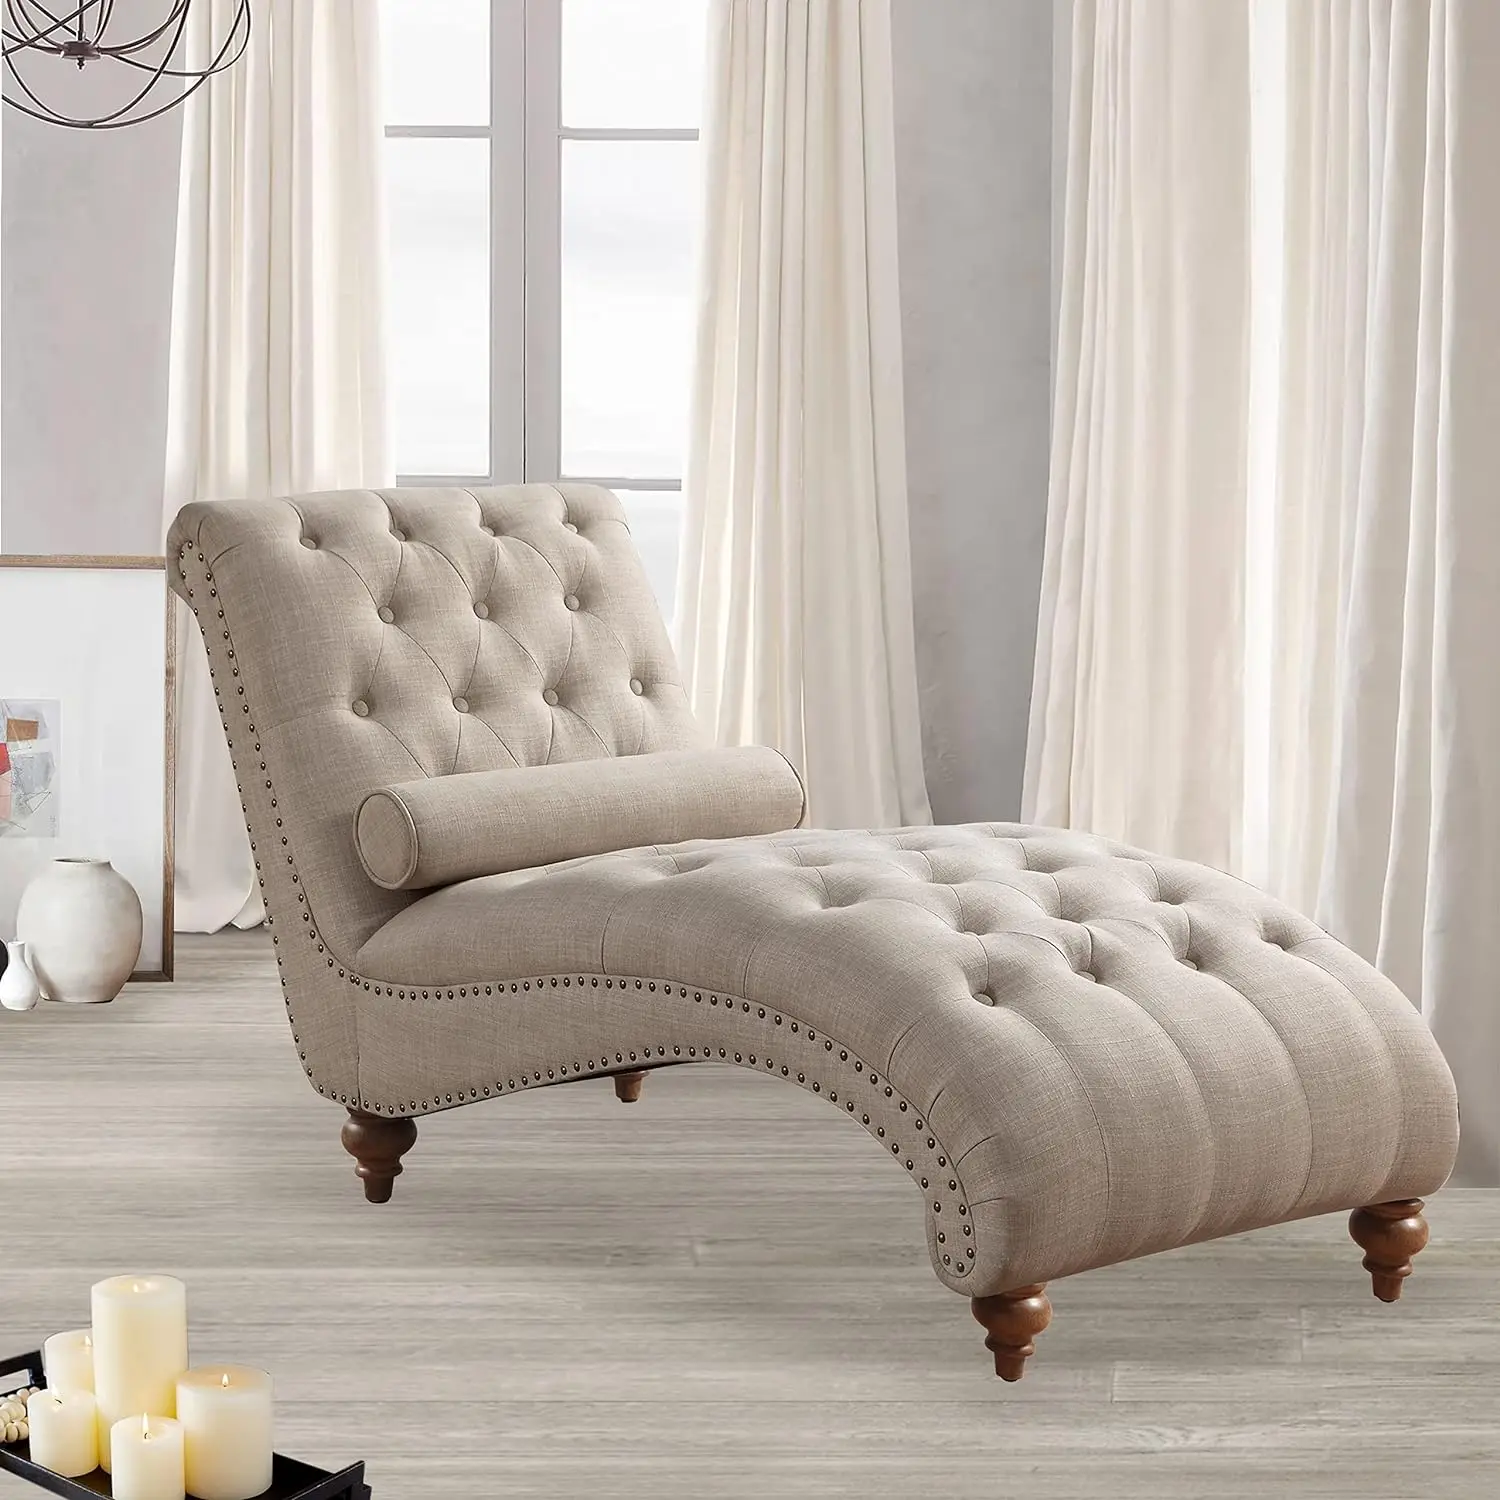 

Linen Upholstered Chaise Lounge Chair with Nailhead Trim for Living Room and Bedroom, Standard, Cream Beige